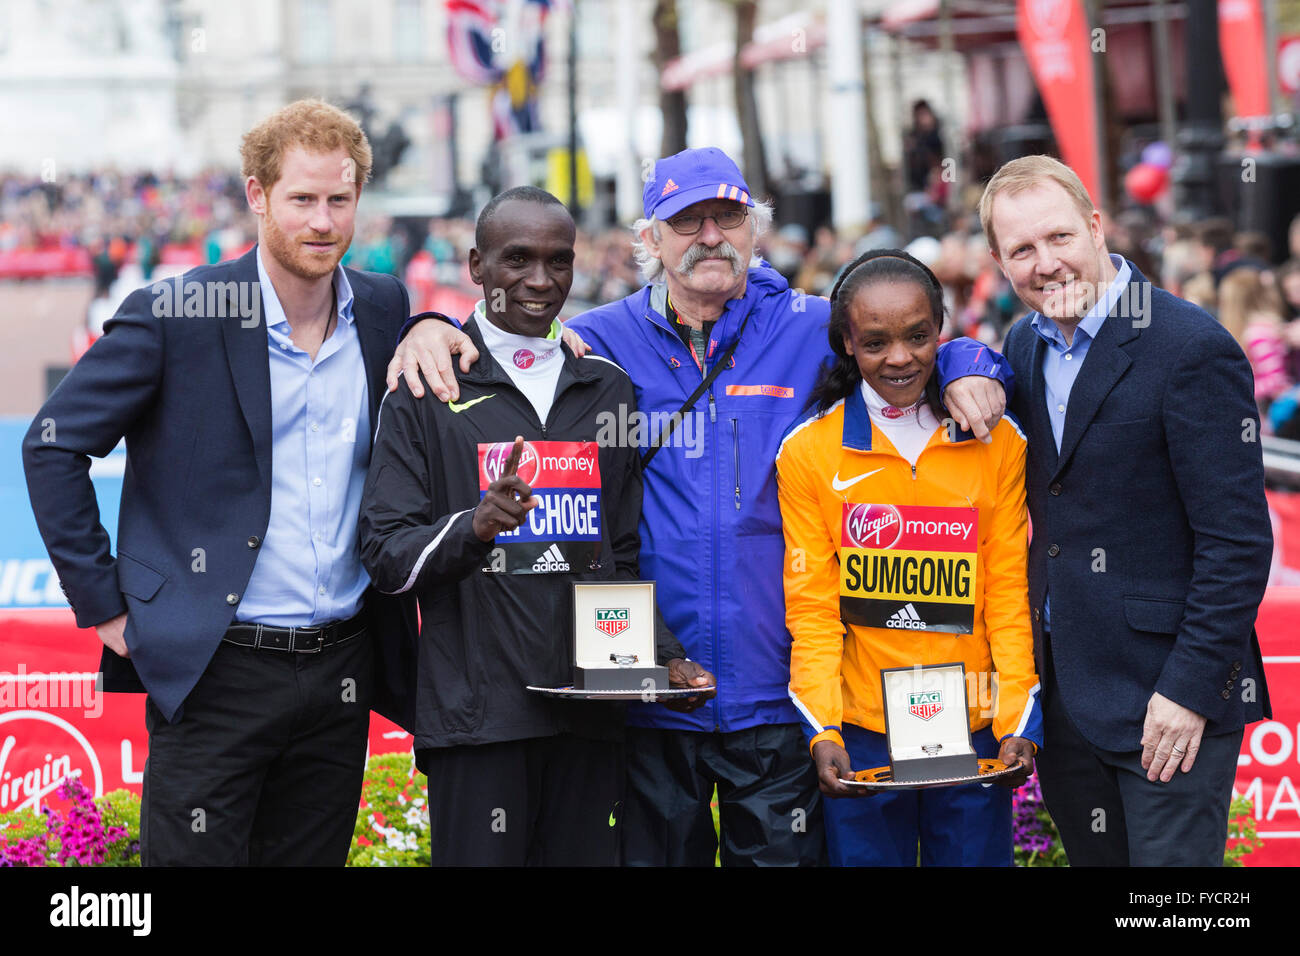 London, UK. 24 April 2016. HRH Prince Harry of Wales and marathon officials  pose with the winners Eliud Kipchoge (KEN) and Jemima Sumgong (KEN). The  2016 Virgin Money London Marathon finishes on